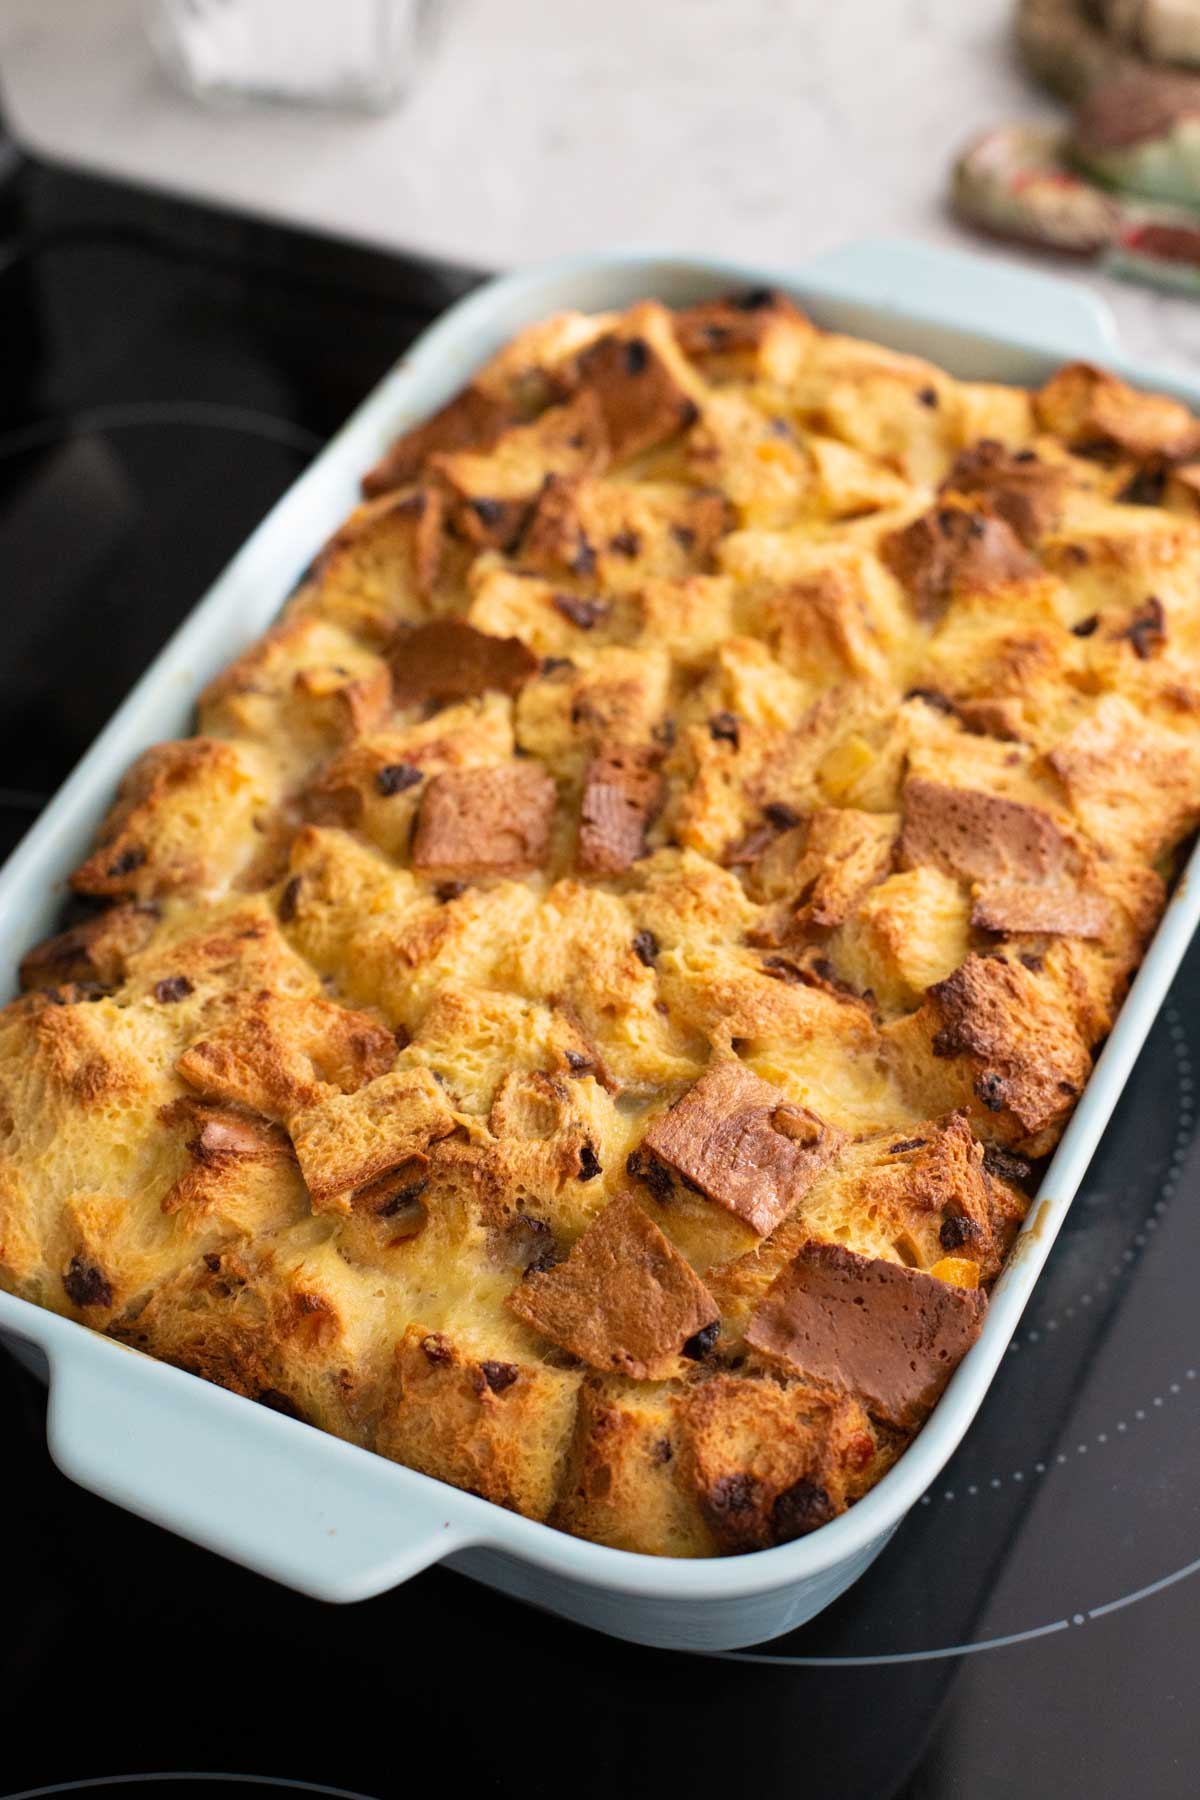 The panettone bread pudding is cooling slightly on the stovetop. It has a golden brown crust.